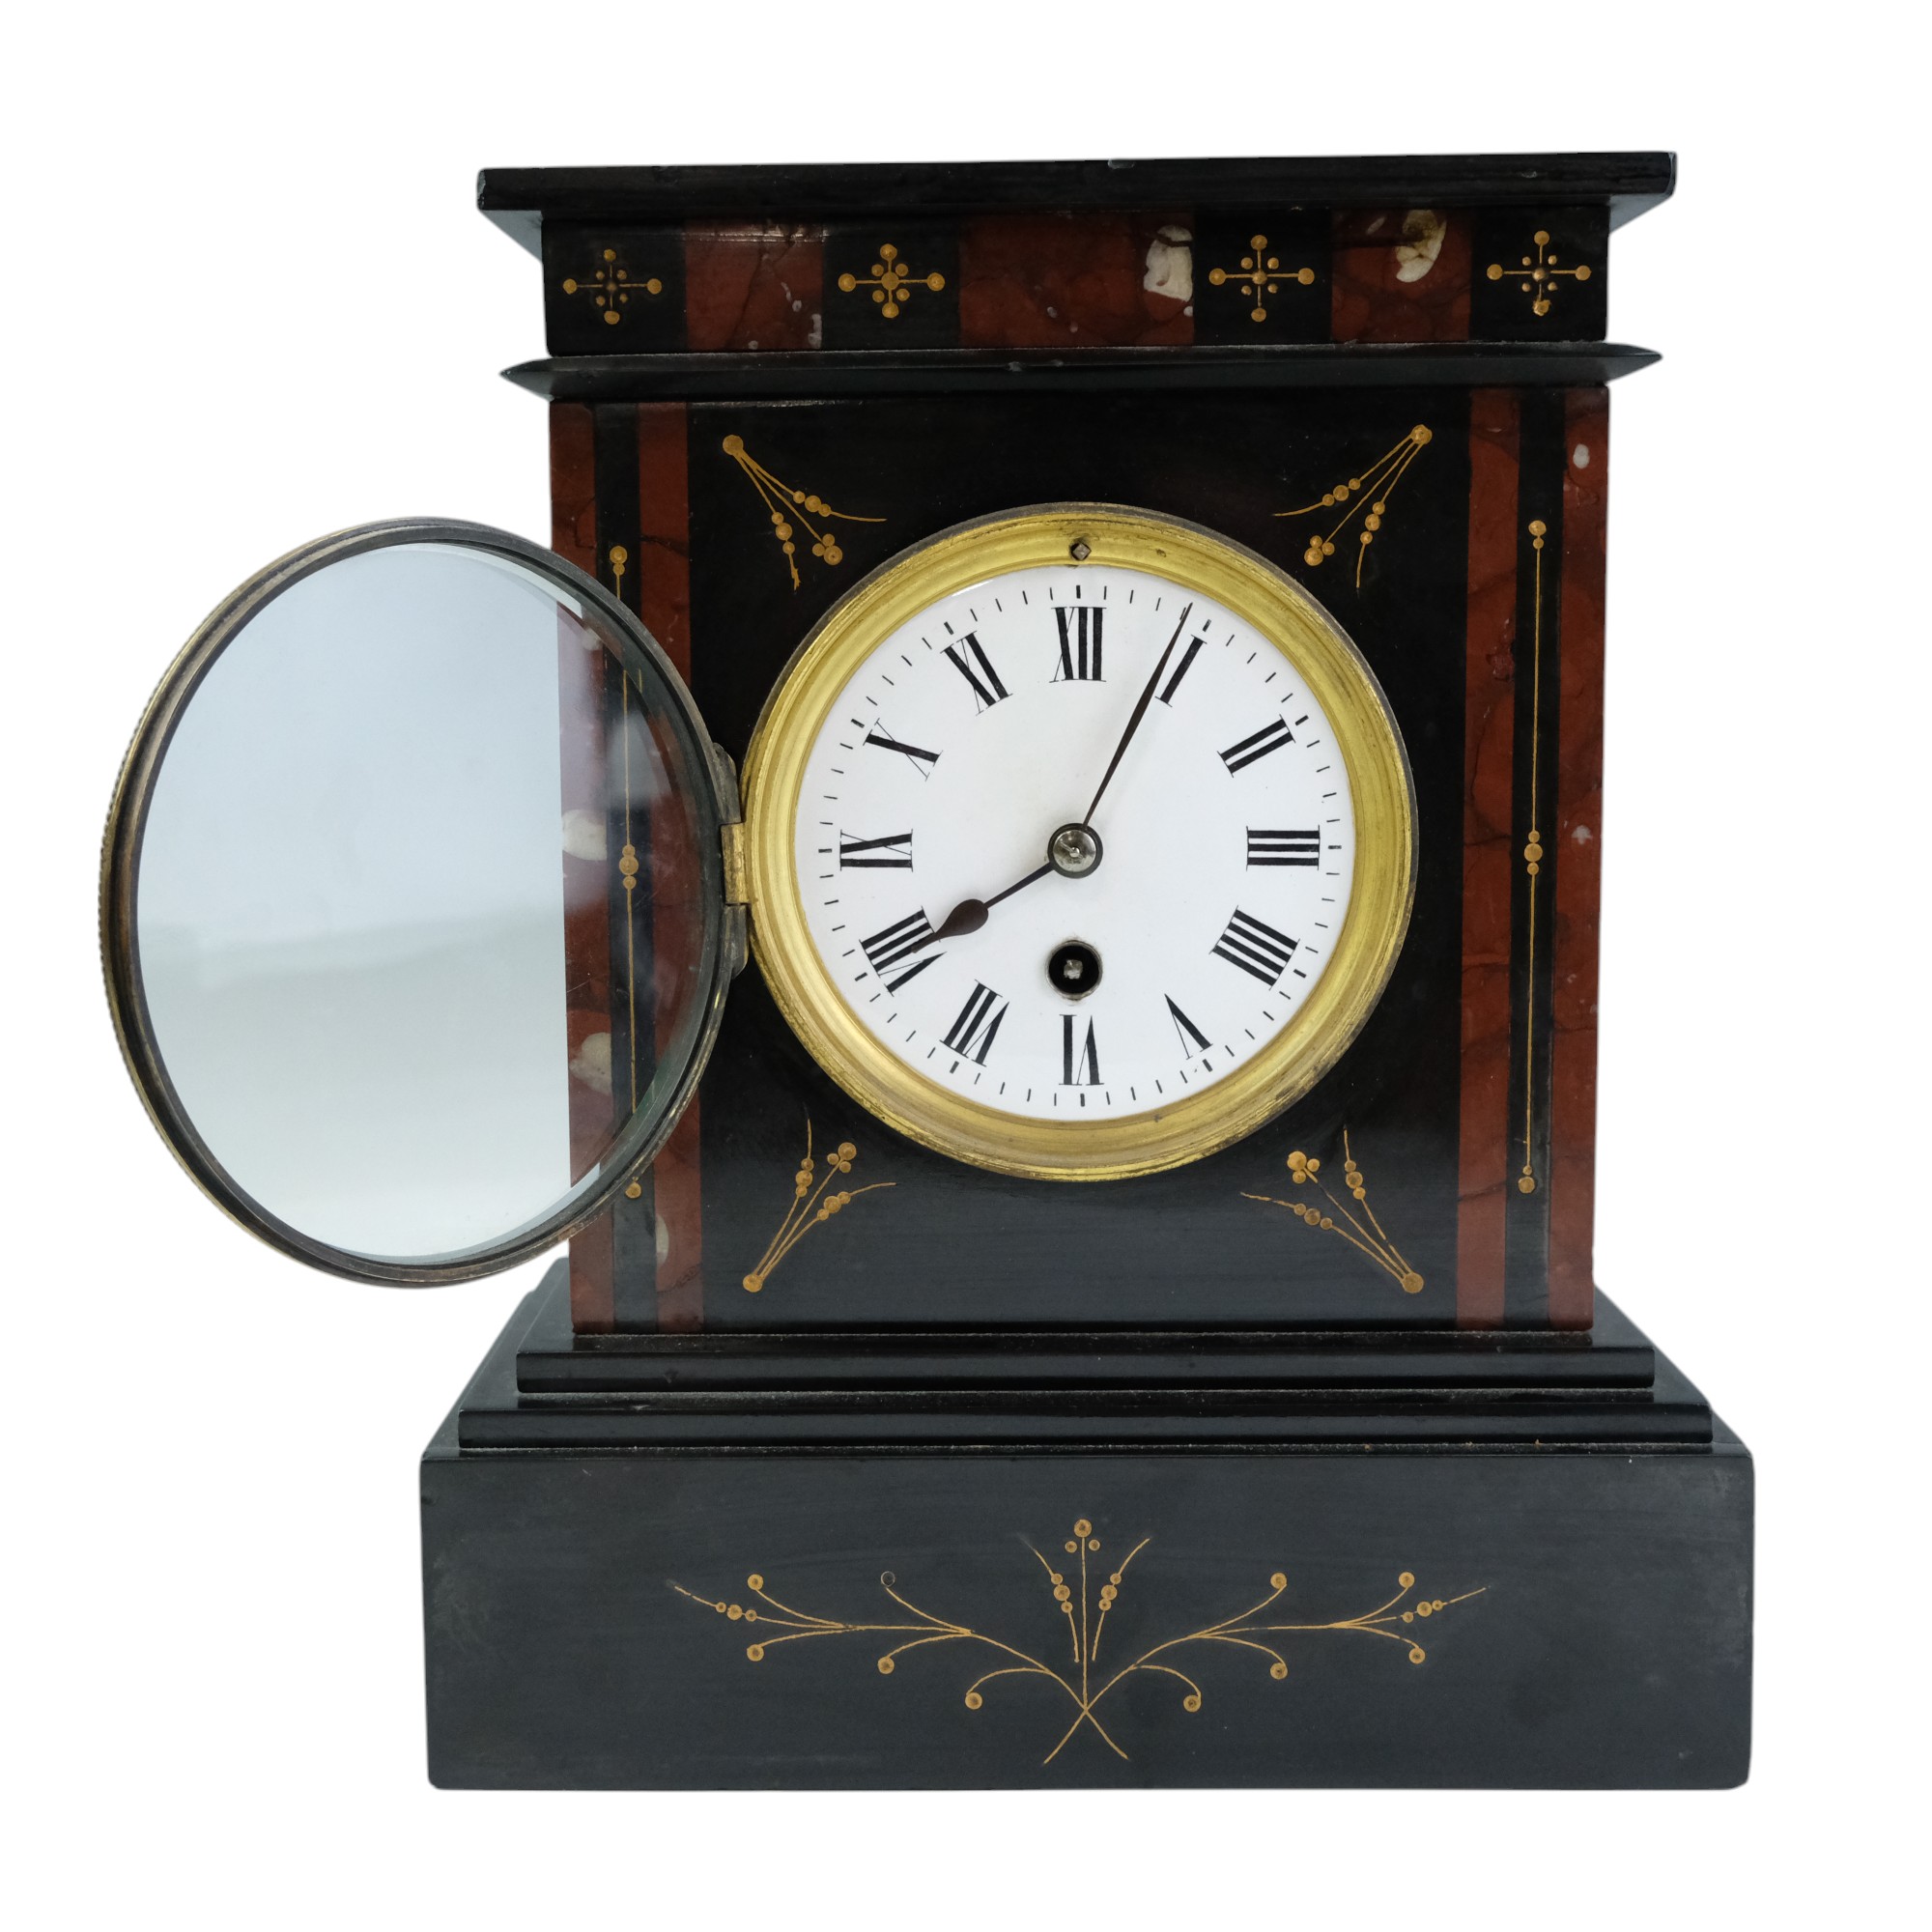 A Victorian parcel-gilt polished slate and red marble mantle clock having a single train movement, - Image 2 of 5